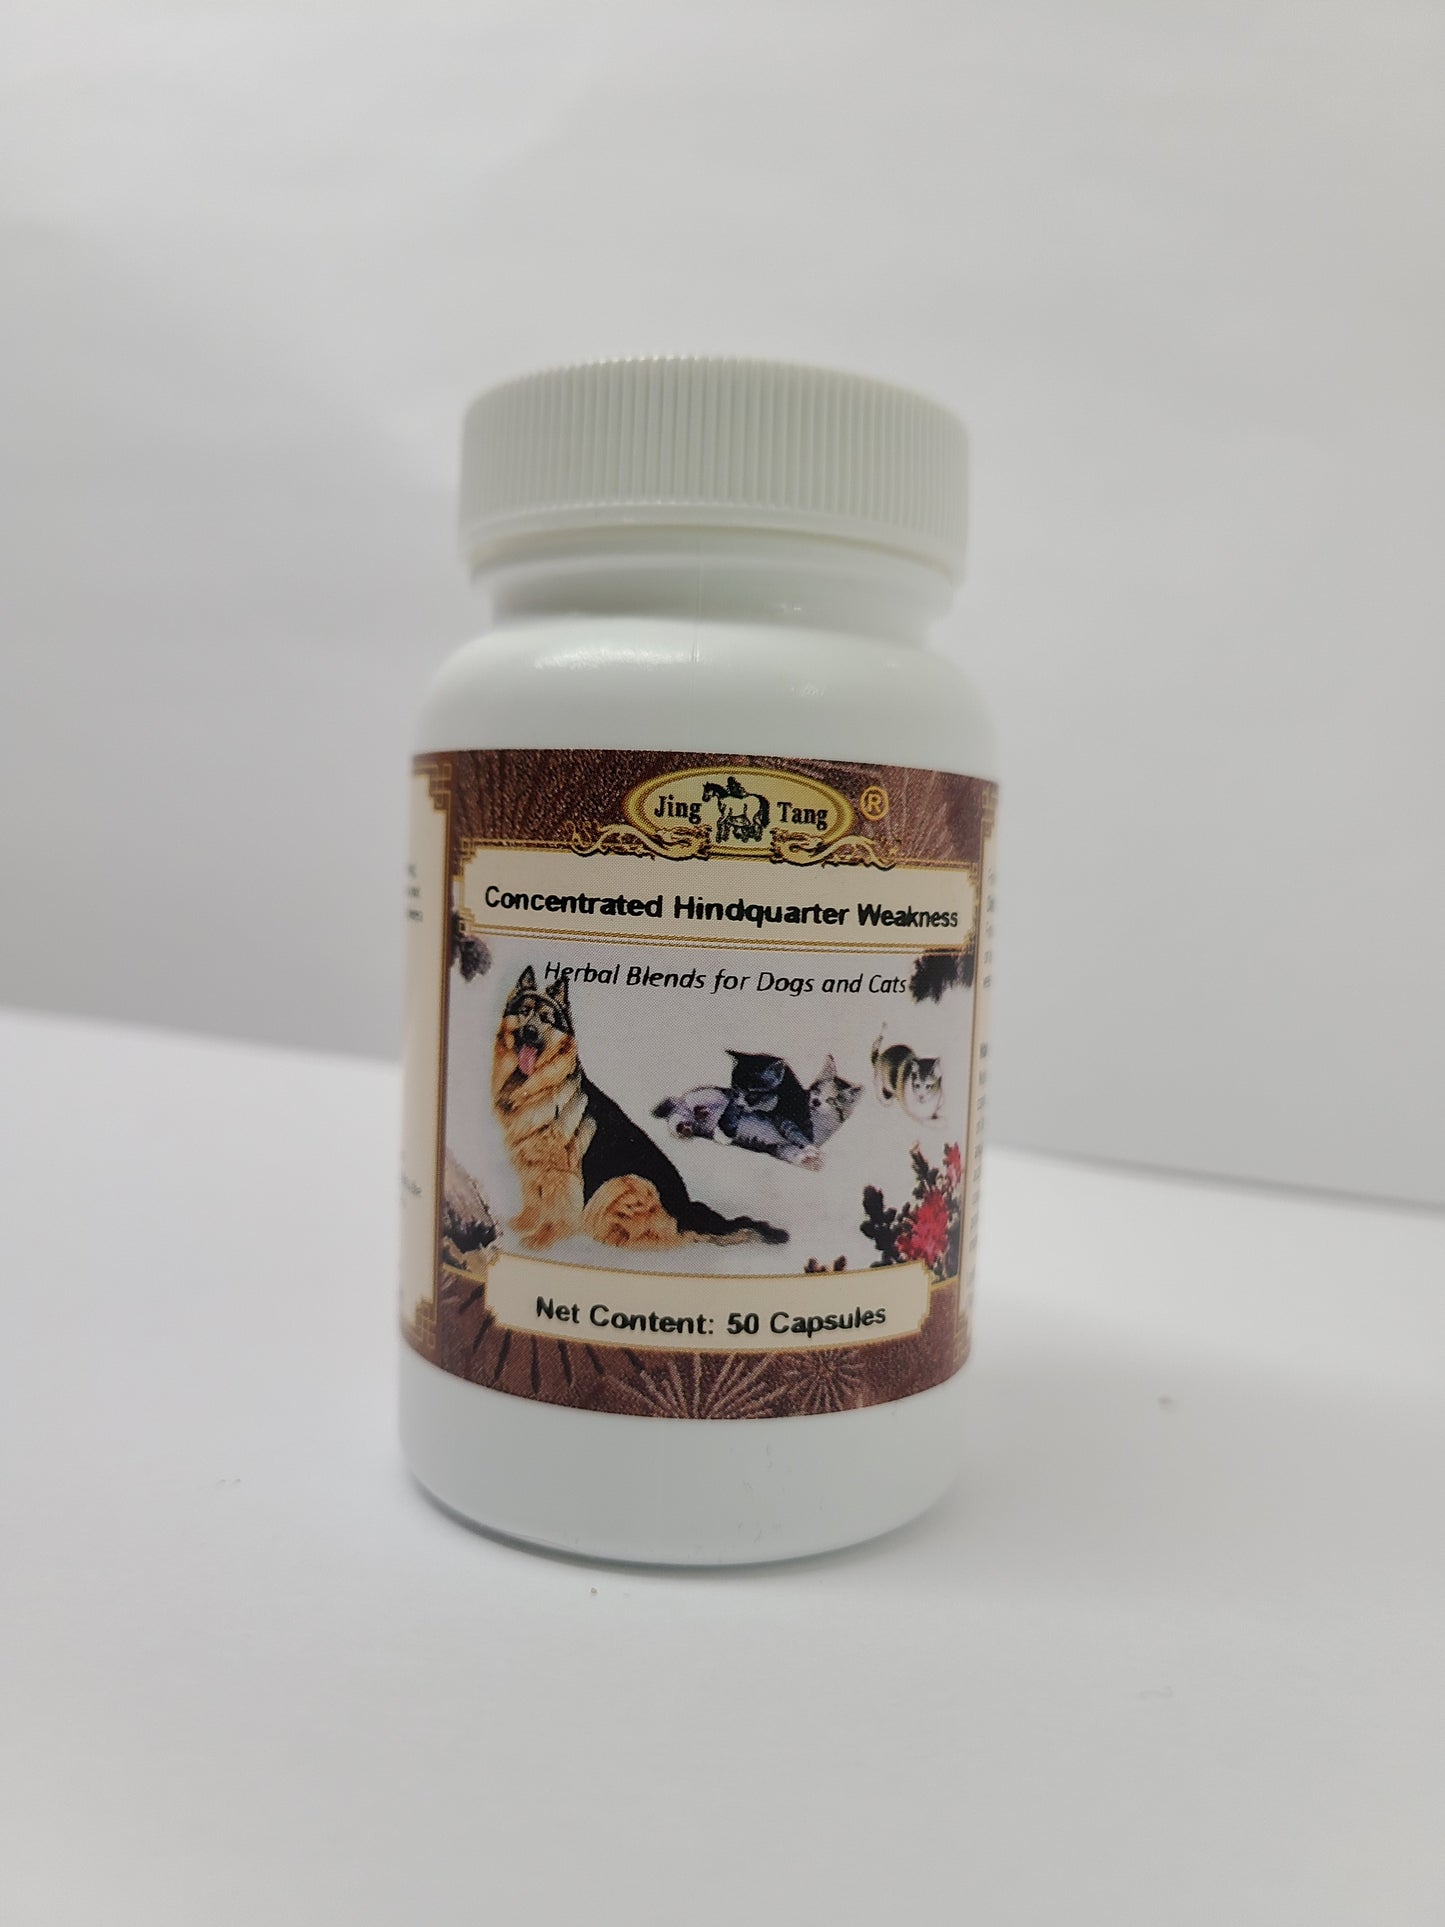 Jing Tang Herbals :Concentrated Hindquarter Weakness 0.2g capsule (50 capsule bottle)